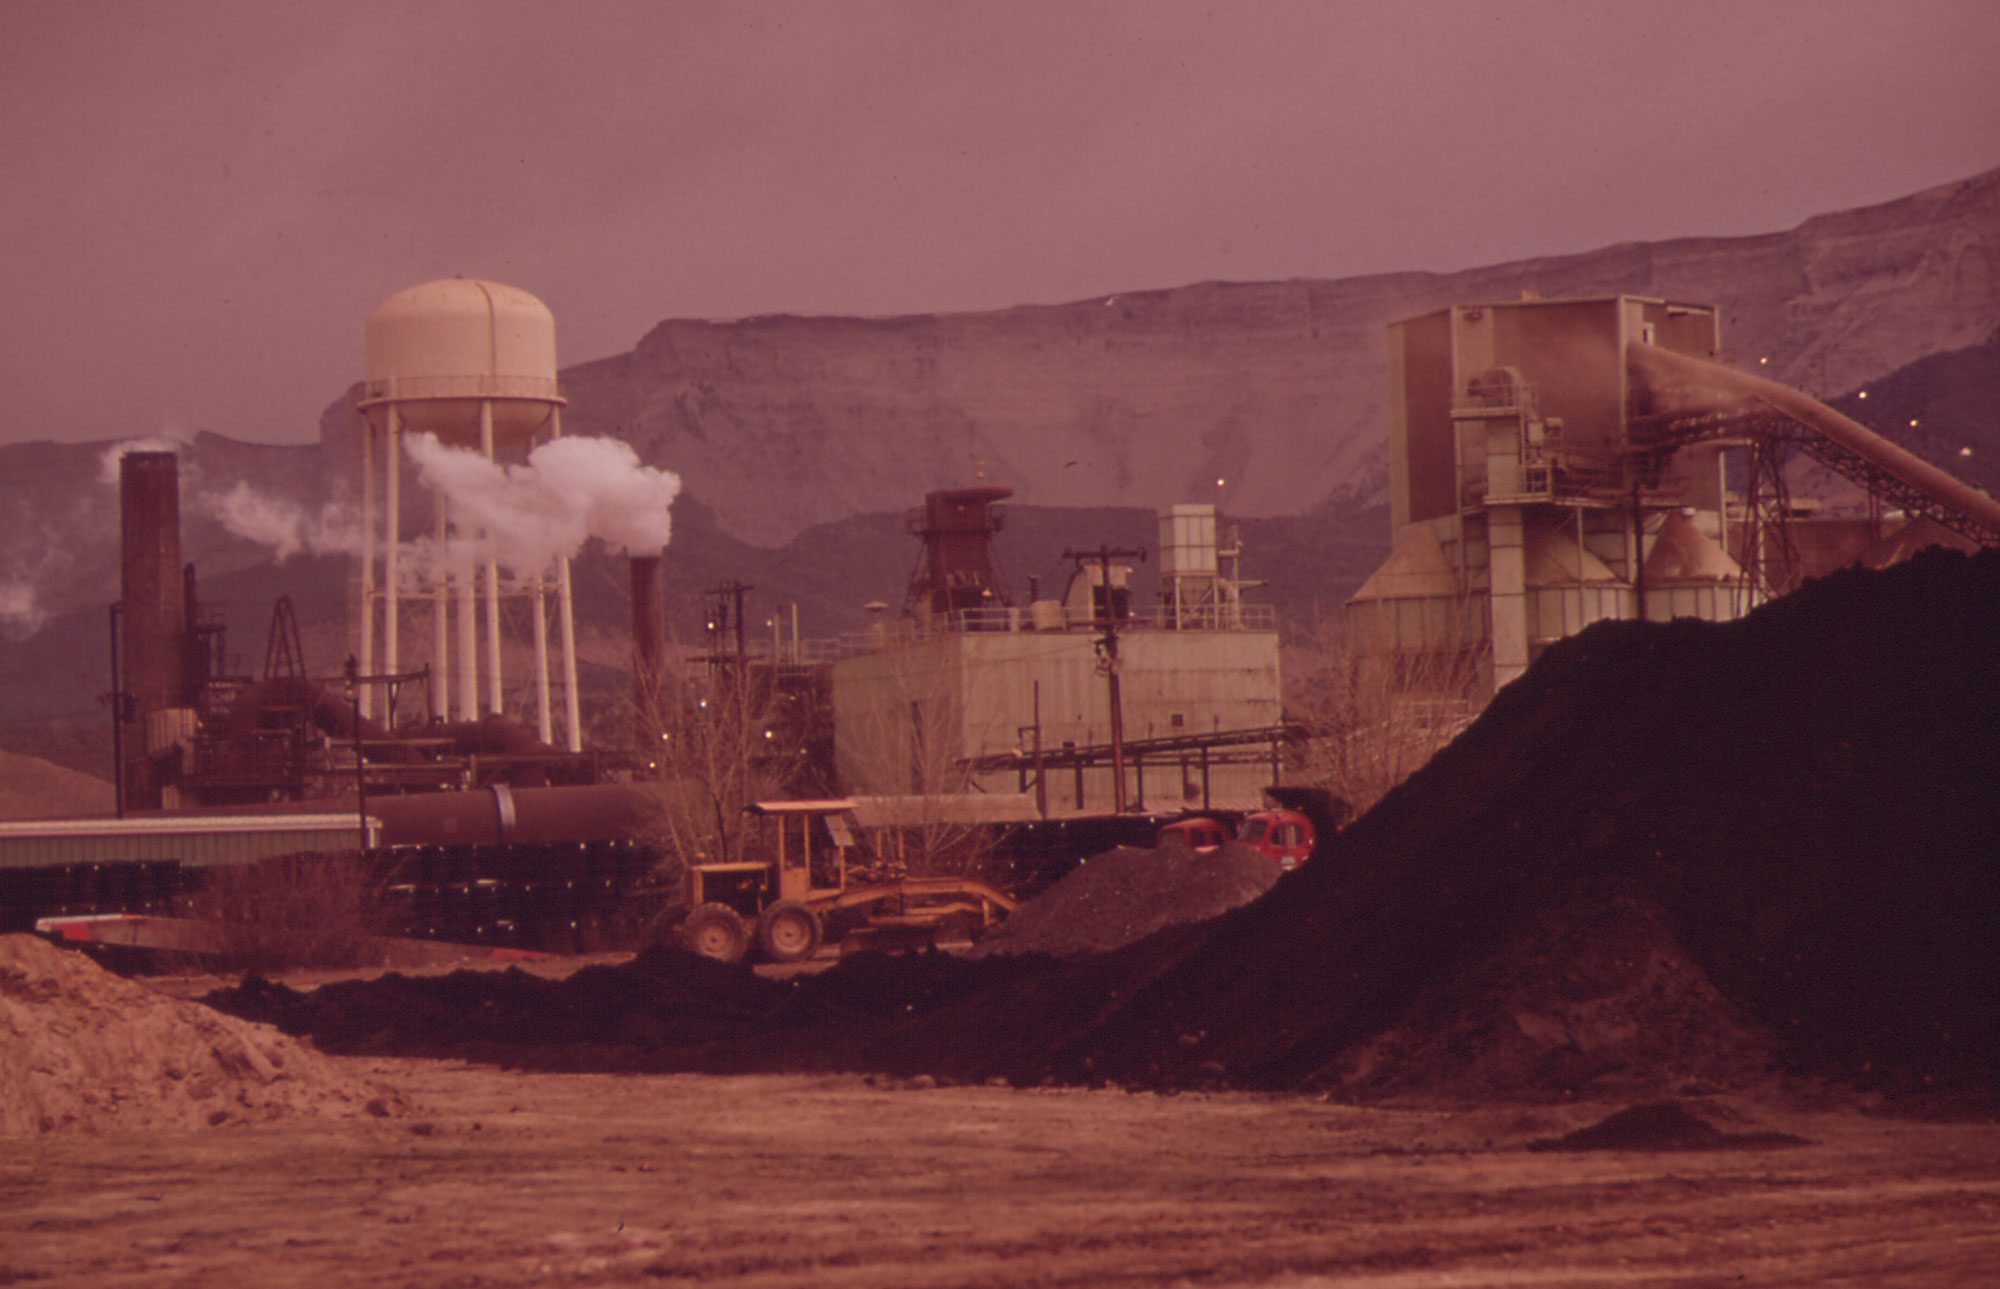 Photograph of a uranium mill in Colorado, 1972. The mill includes a water tower, smokestack, and other structures. In the foreground of the image is a mound of black rock of unknown identity. Tall cliffs rise behind the mill in the background.